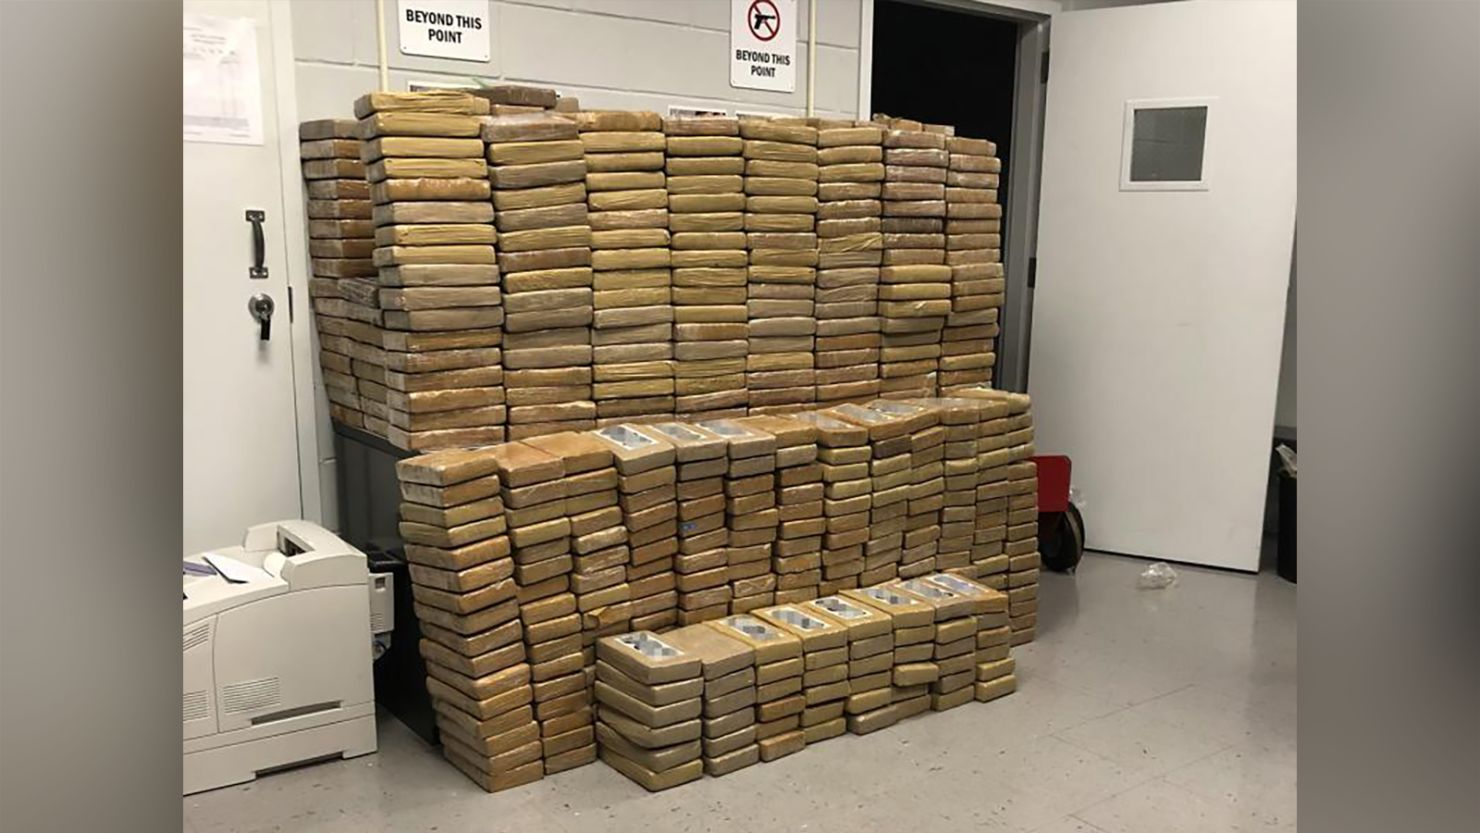 A $31 million cocaine bust in Savannah sets a new record